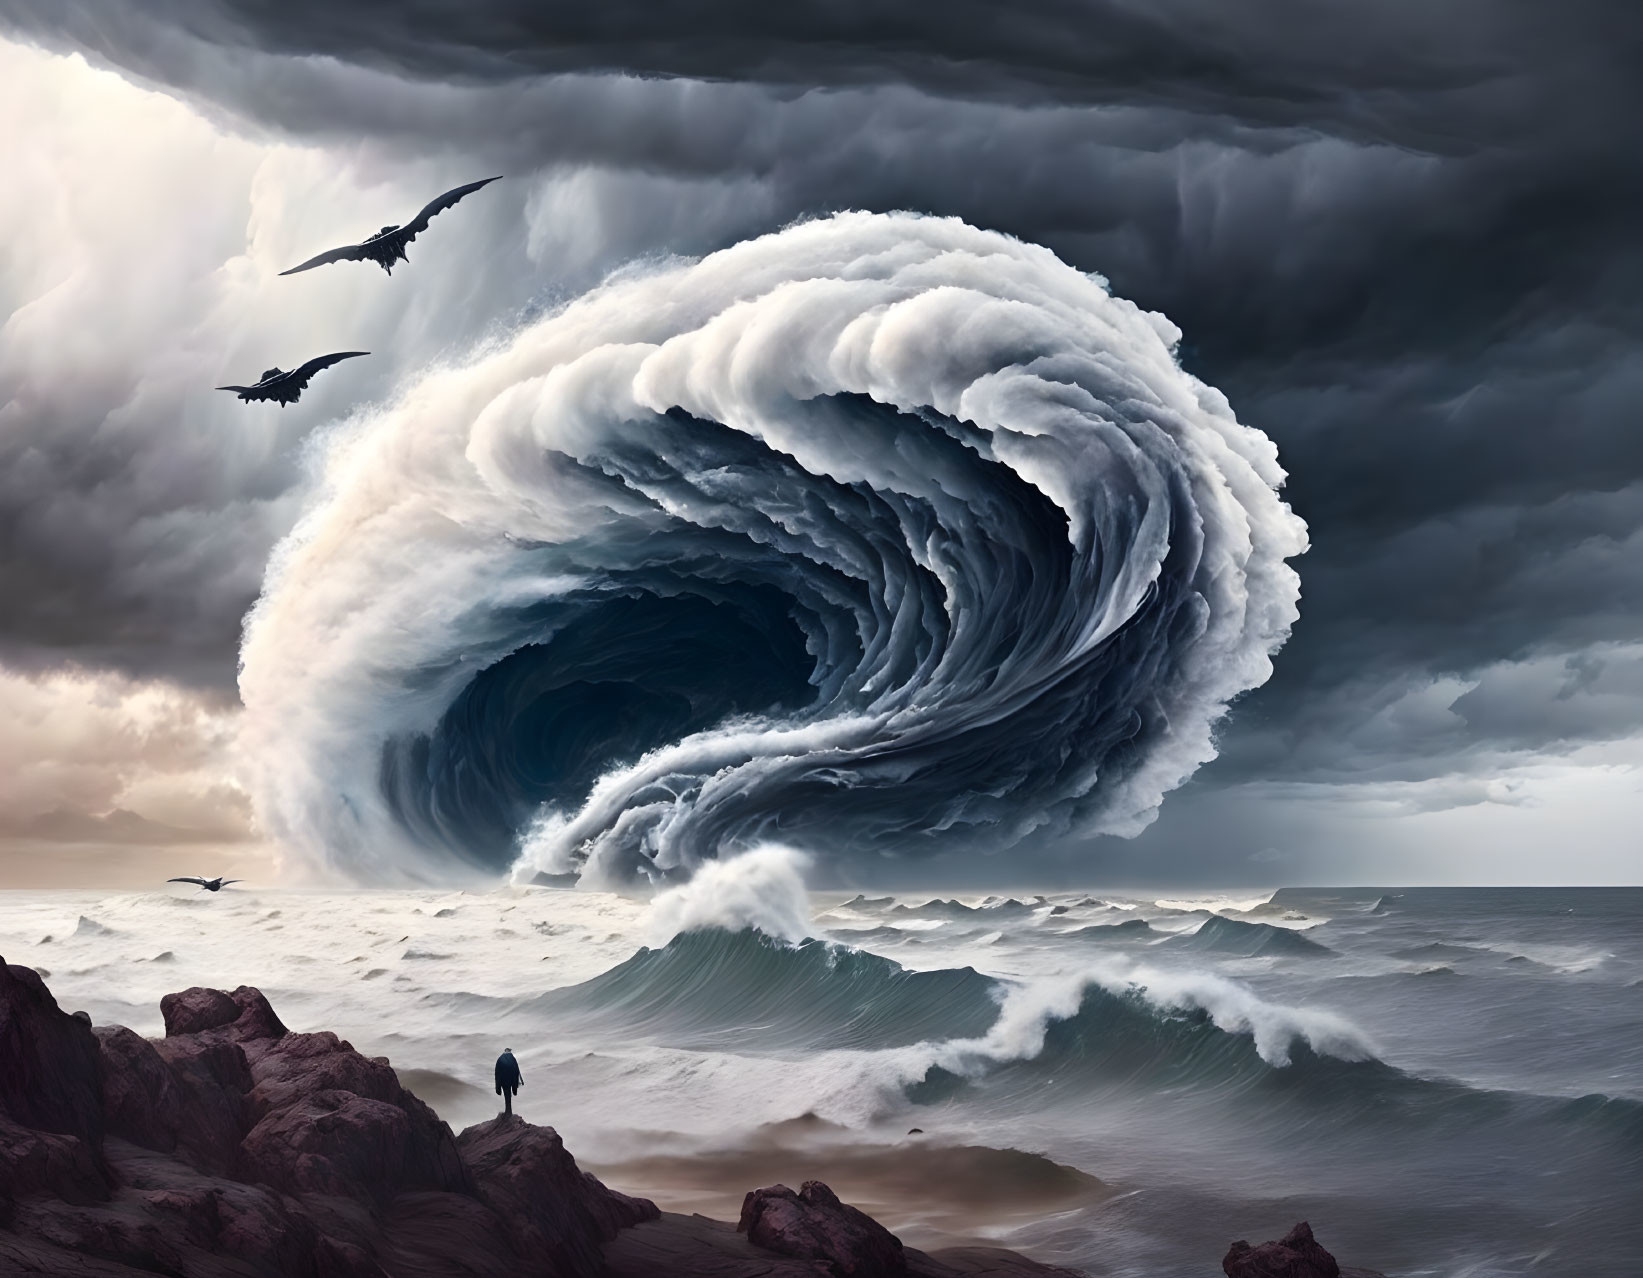 Person gazes at swirling cloud resembling wave on rocky shoreline